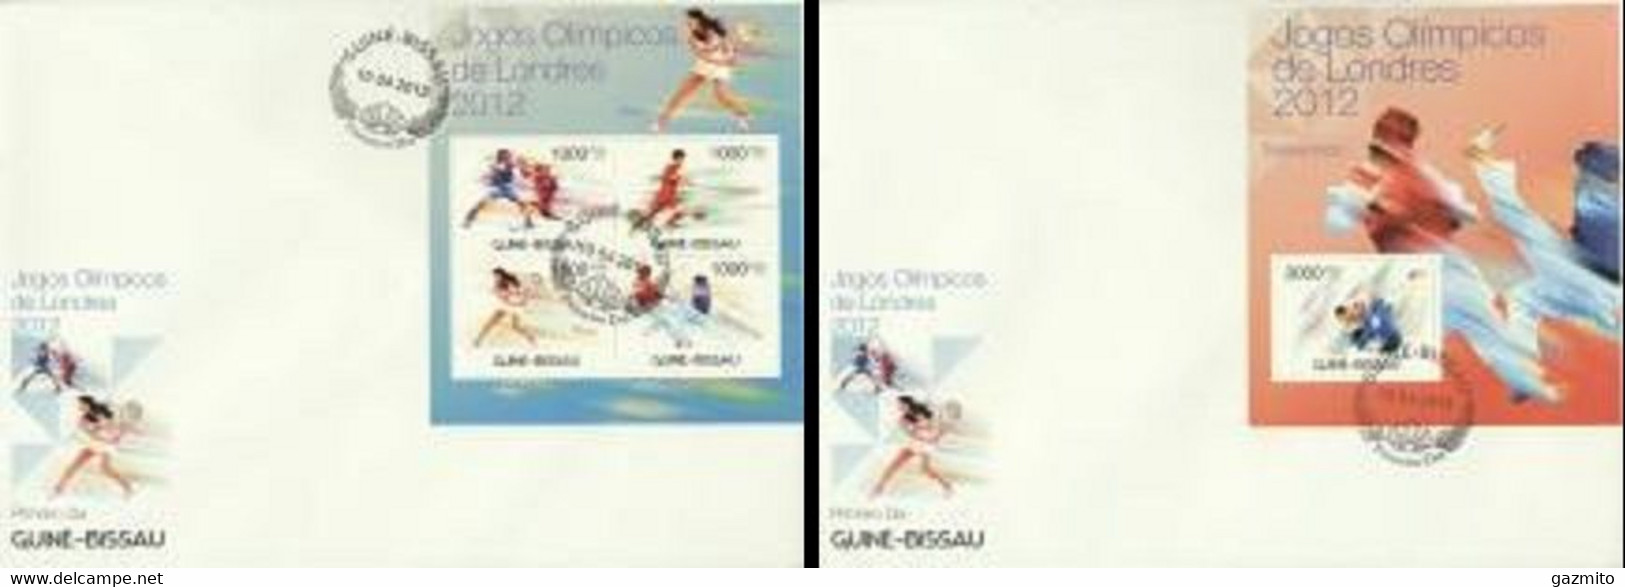 Guinea Bissau 2012, Olympic Games In London, Taekwondo, 4val In BF +BF IMPERFORATED In 2FDC - Sin Clasificación